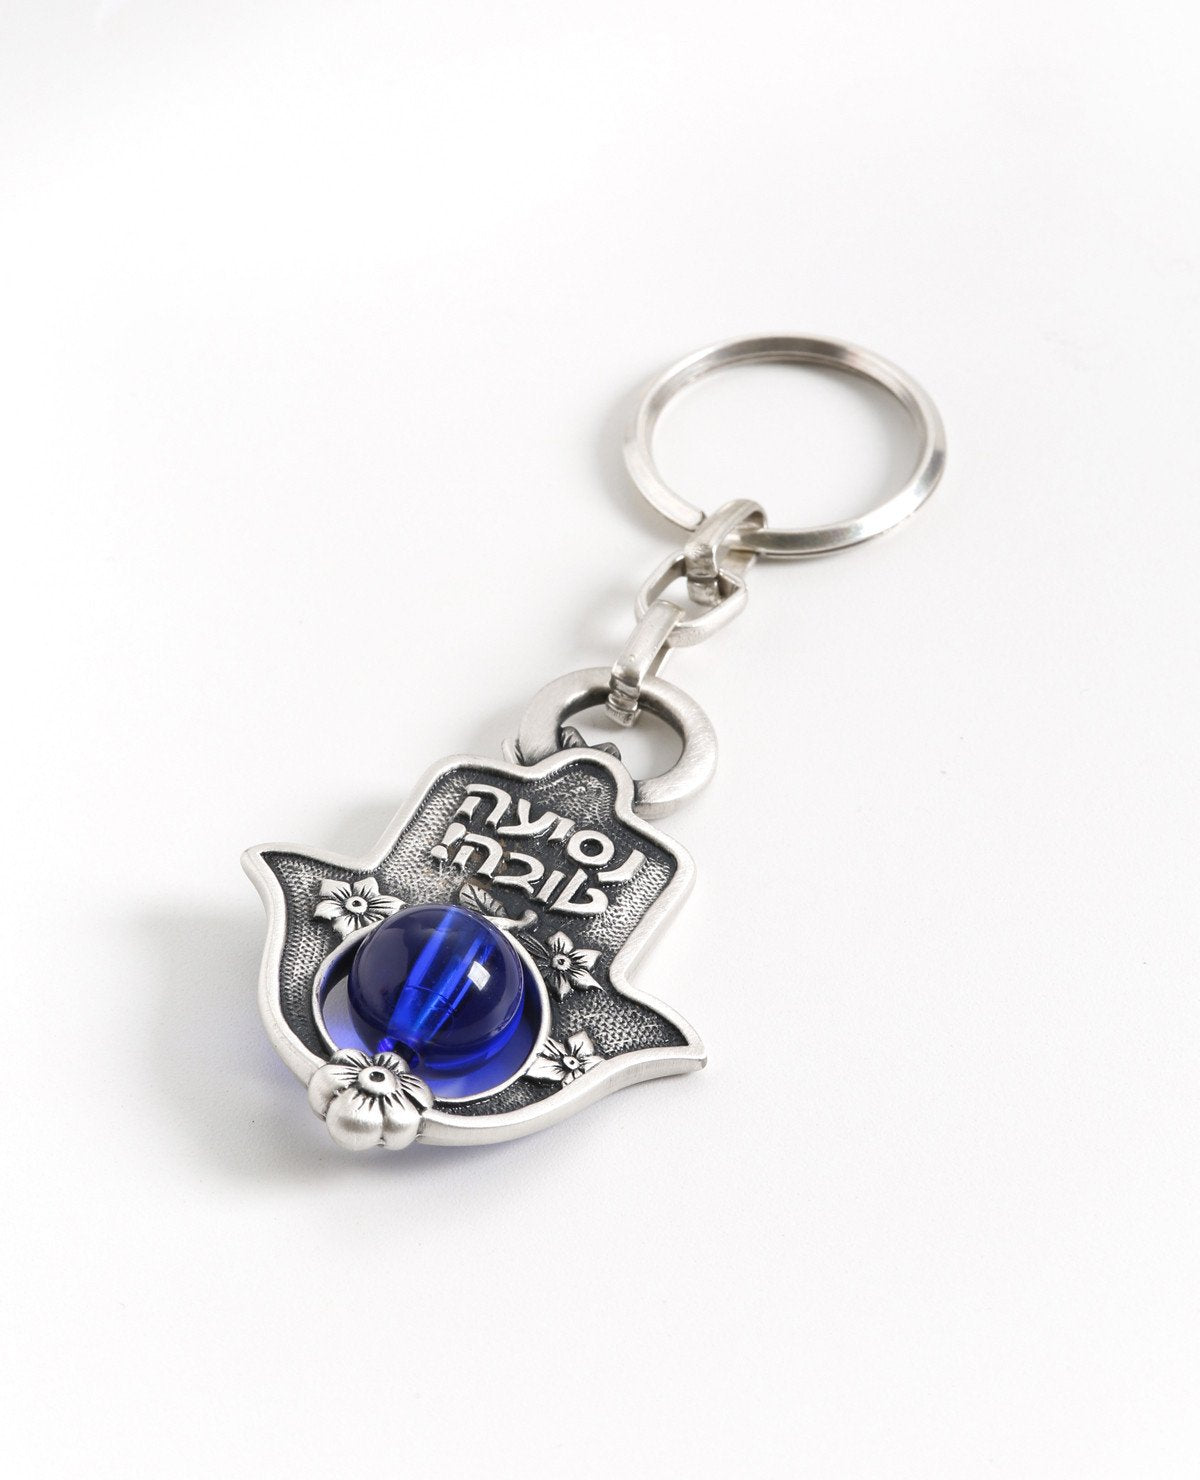 A delicate and charmingly designed Hamsa keychain. The Hamsa is coated in sterling silver and has a stunning blue bead which can be seen from both sides of the Hamsa threaded on its bottom part. On the one side is a delicate flower decor with the embossed words "Bon Voyage!" while the other side is decorated with flowers and a pair of fish. The keychain is strong and reliable. Makes a great present for anyone whose vehicle's keys are in need of a pretty holder. Blessed with the Hamsa charm against the "evil